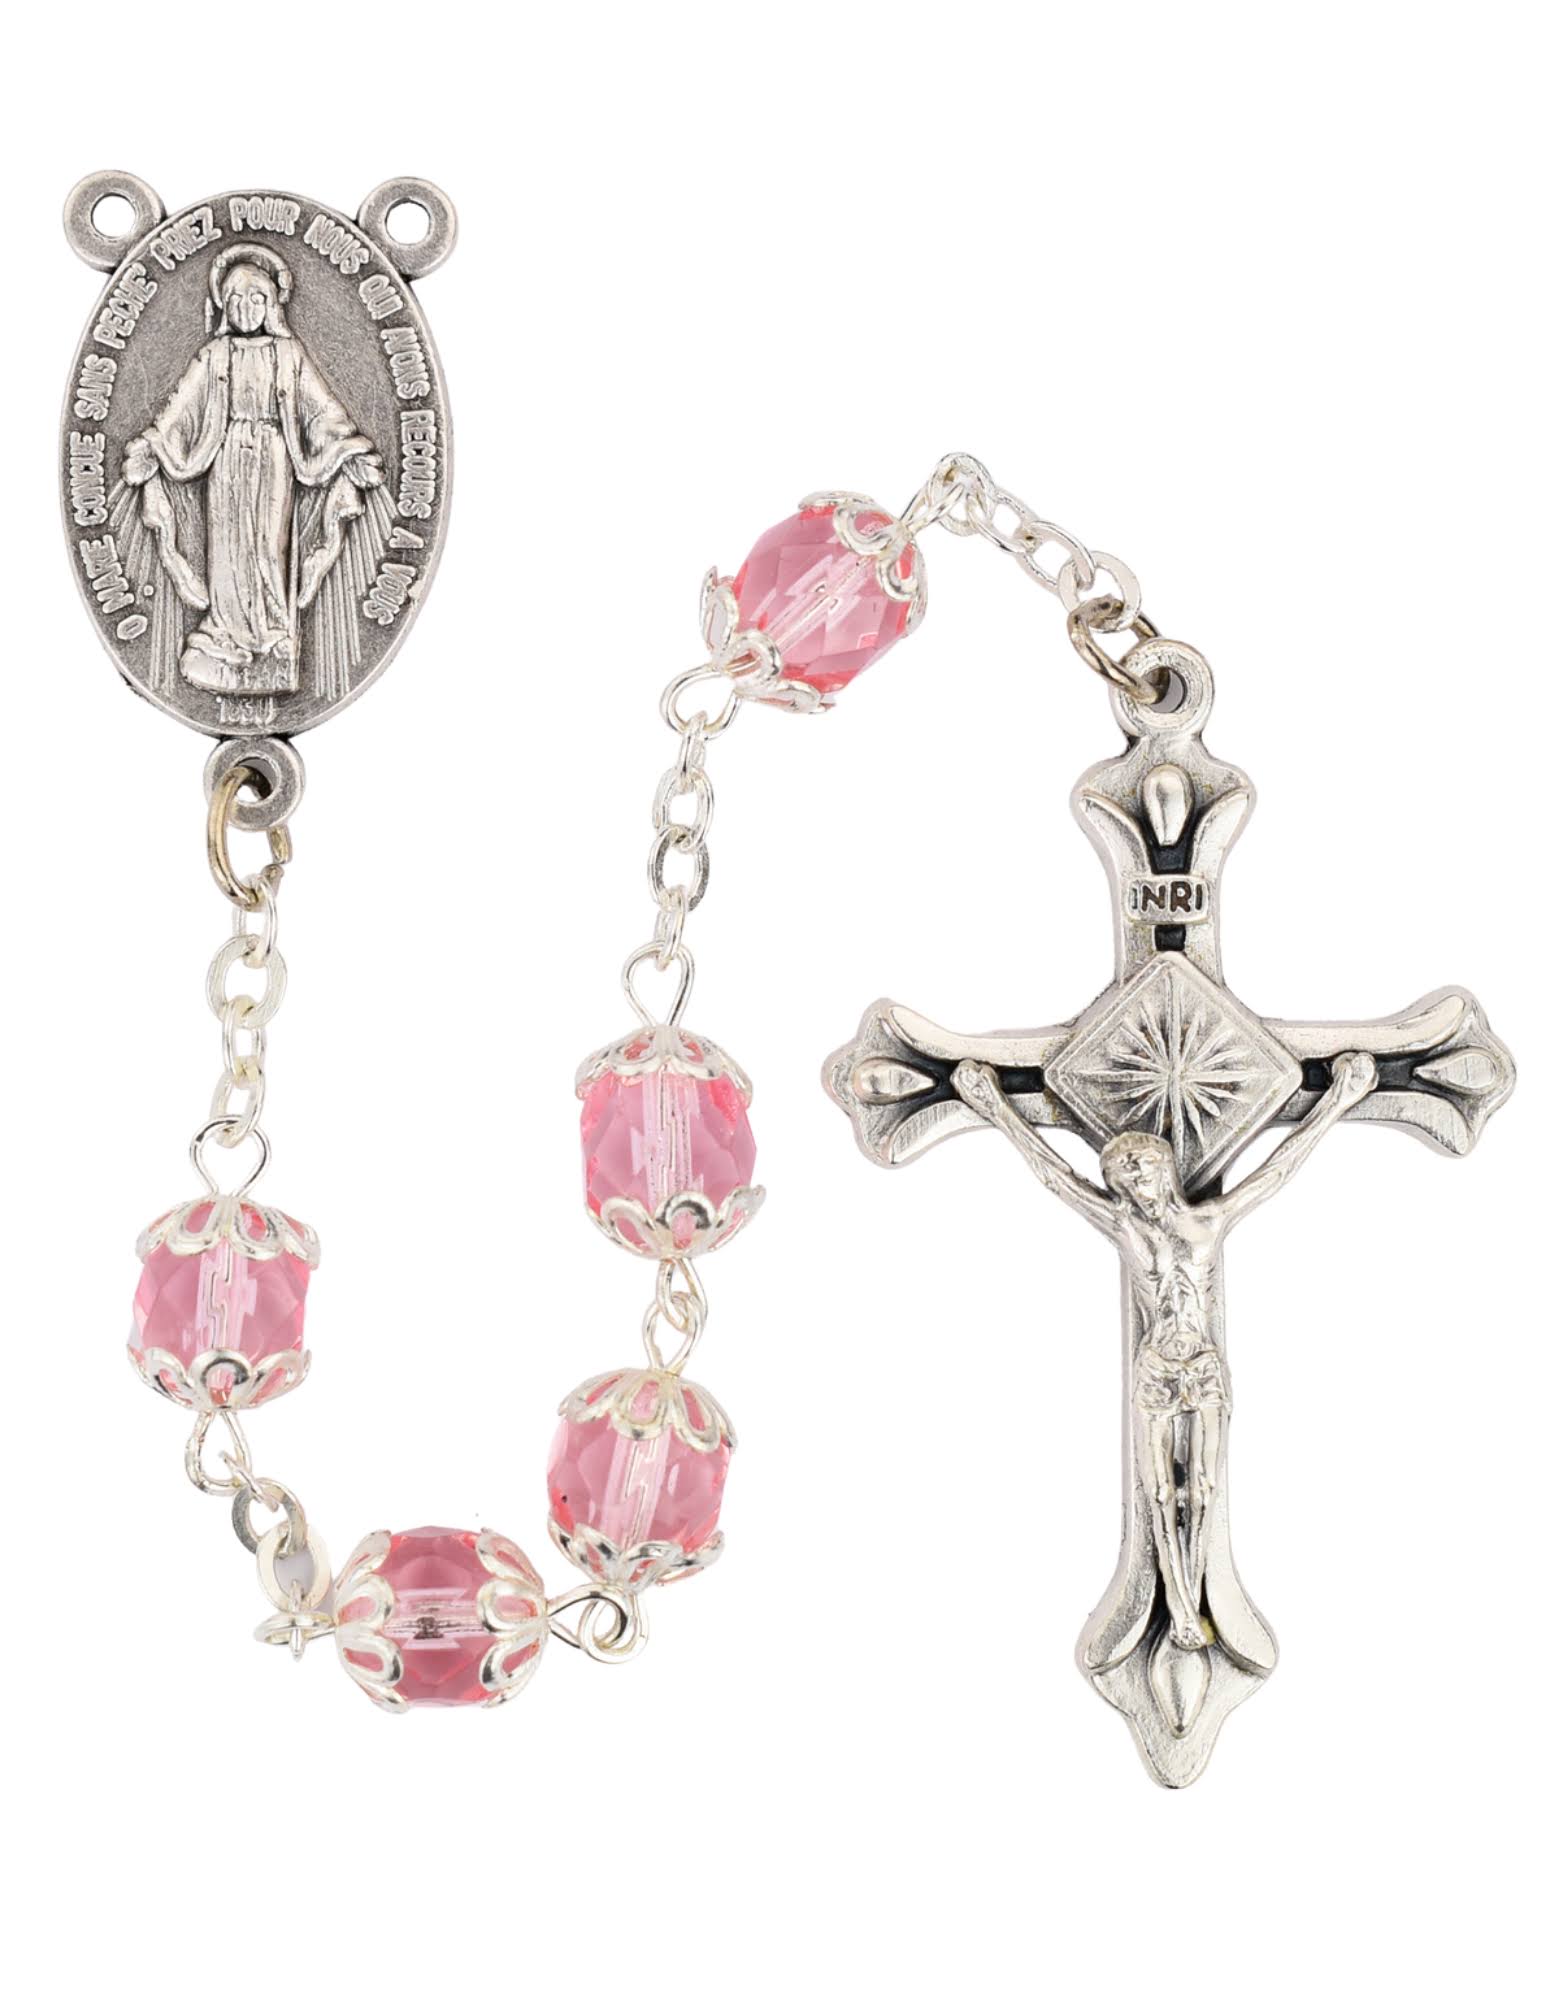 7mm Pink Crystal Beads Rosary